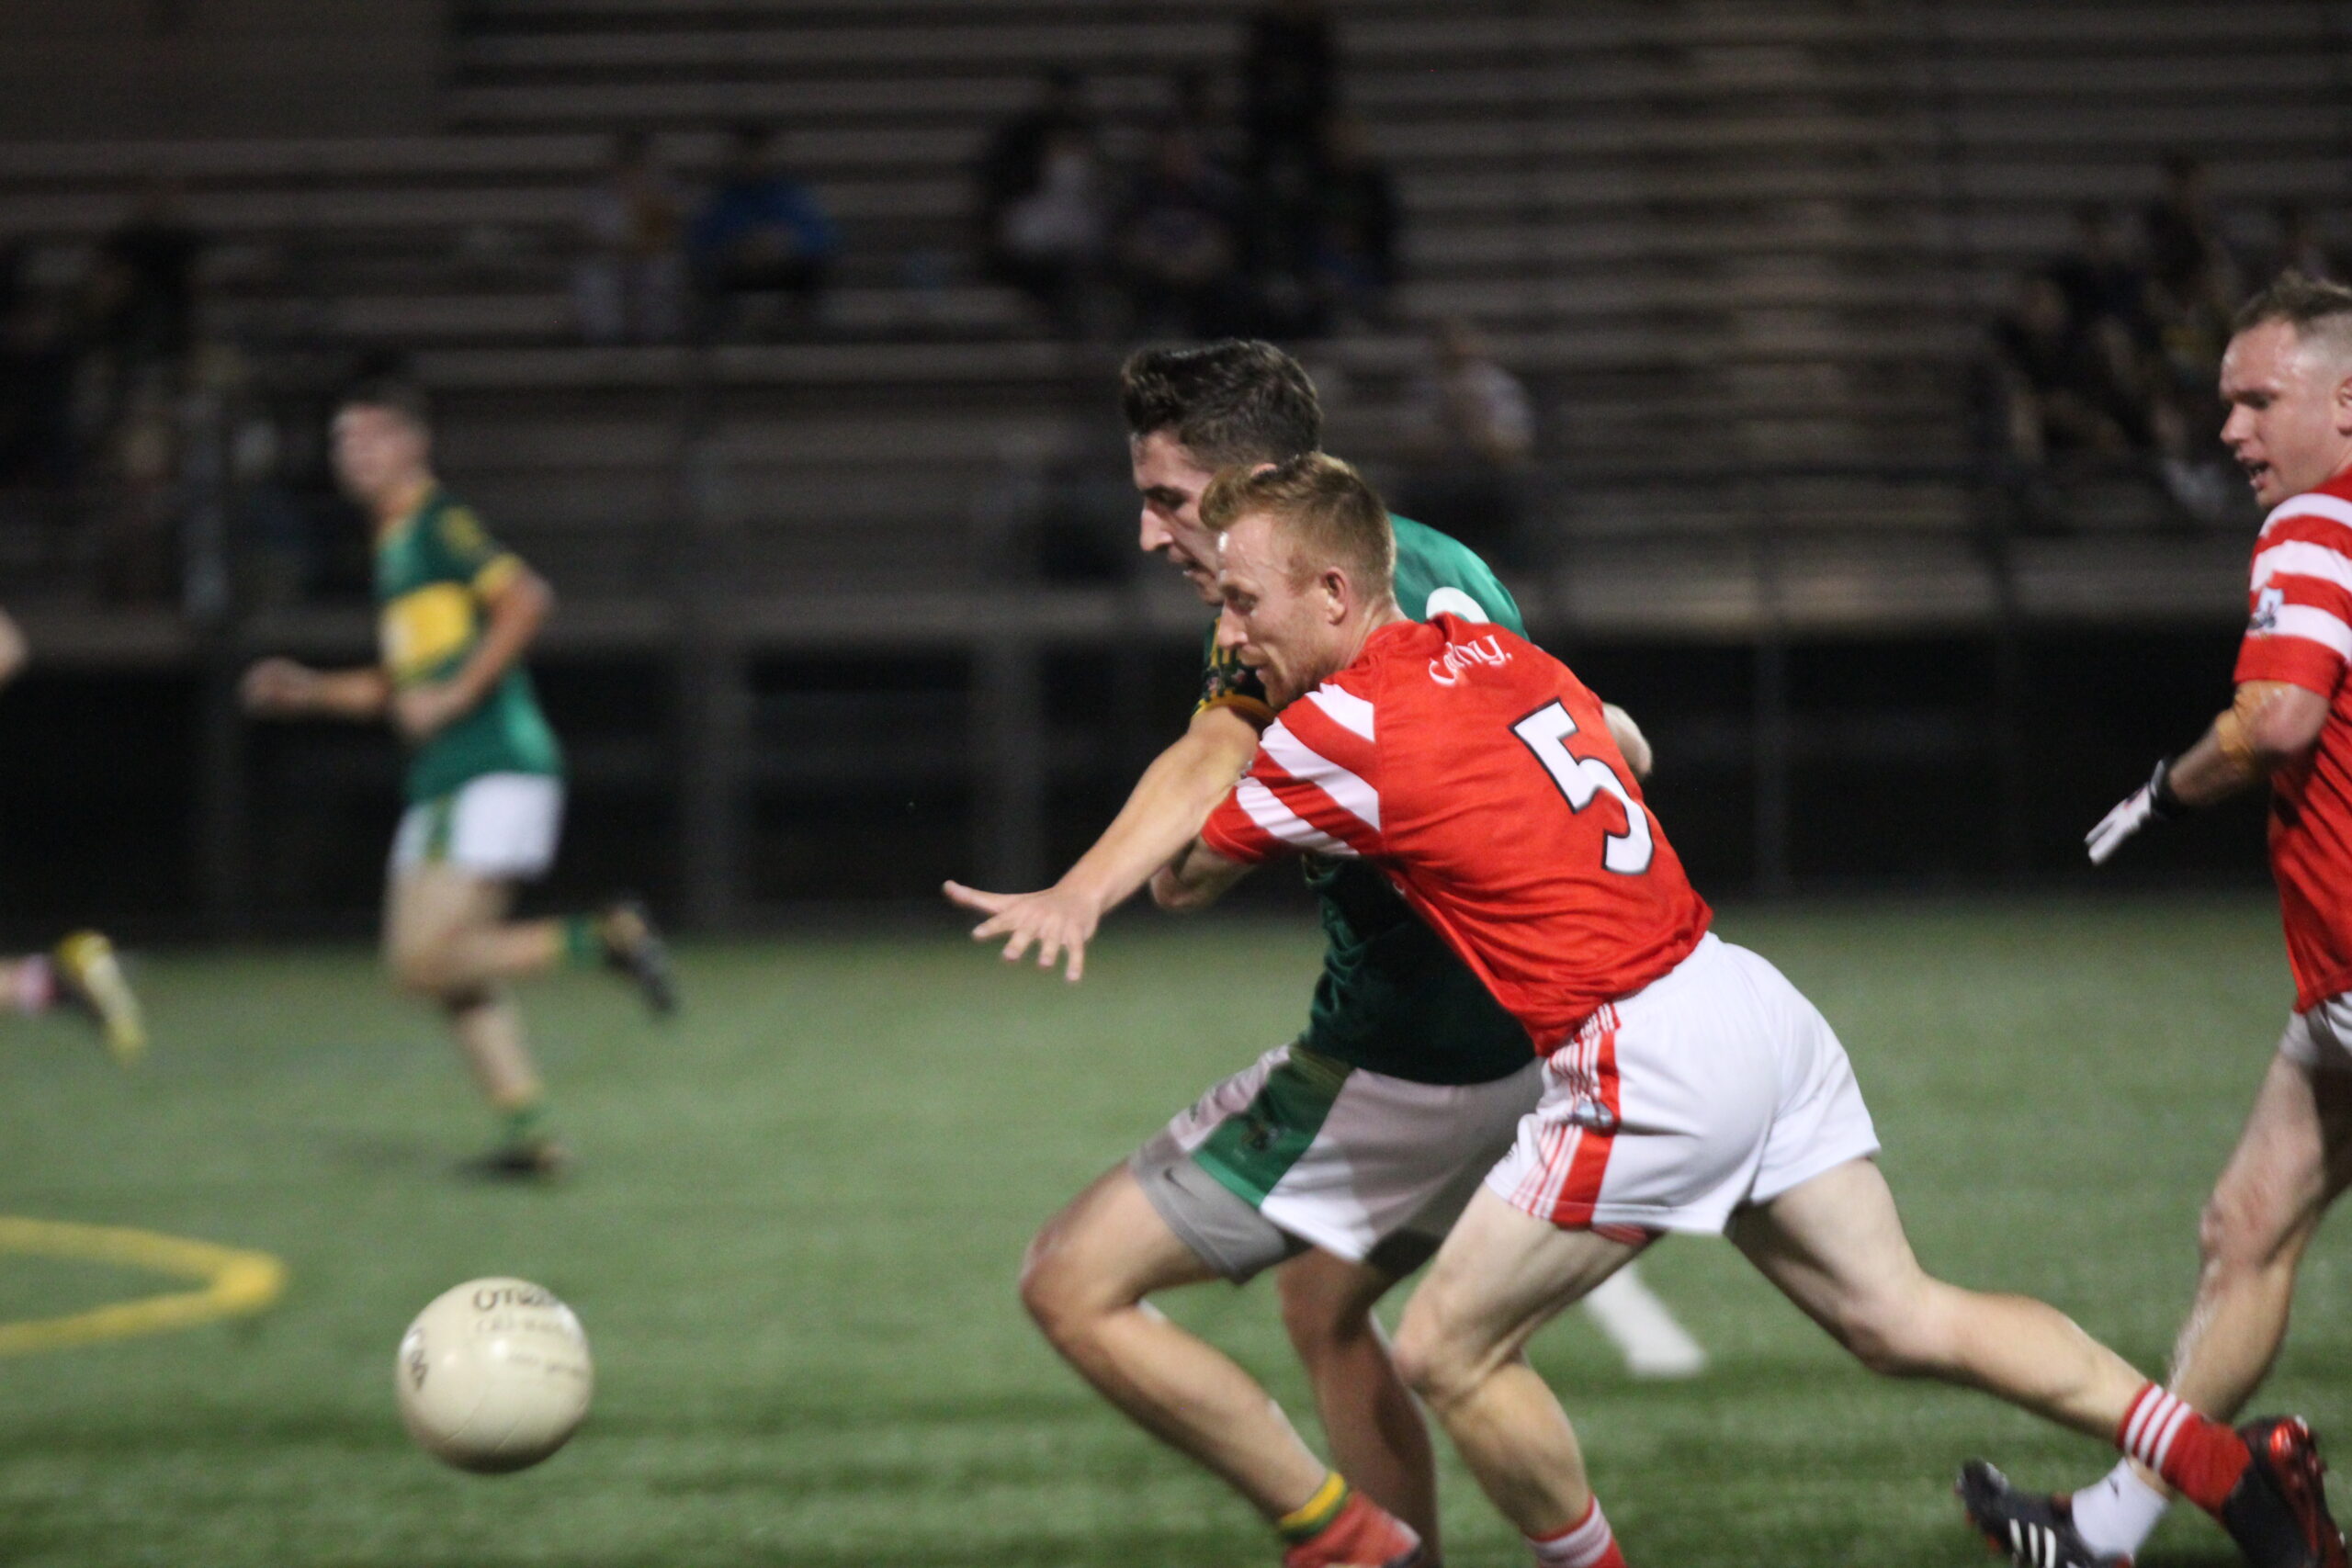 Action from Cork v St. Barnabas in the 2021 Bew York Junior A Football Final (Photo by Sharon Redican)